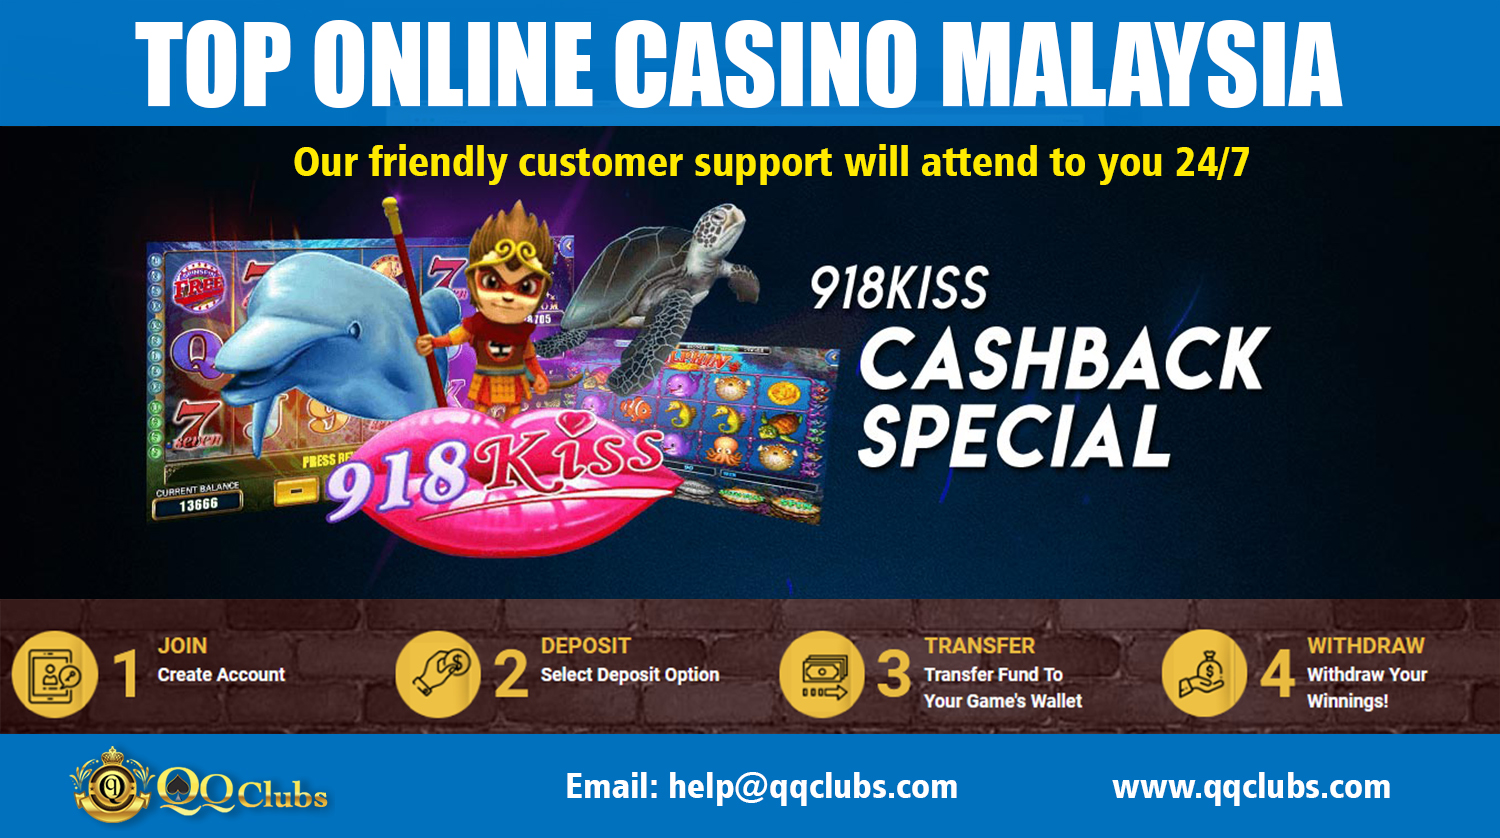 trusted online casino malaysia 2018 форум